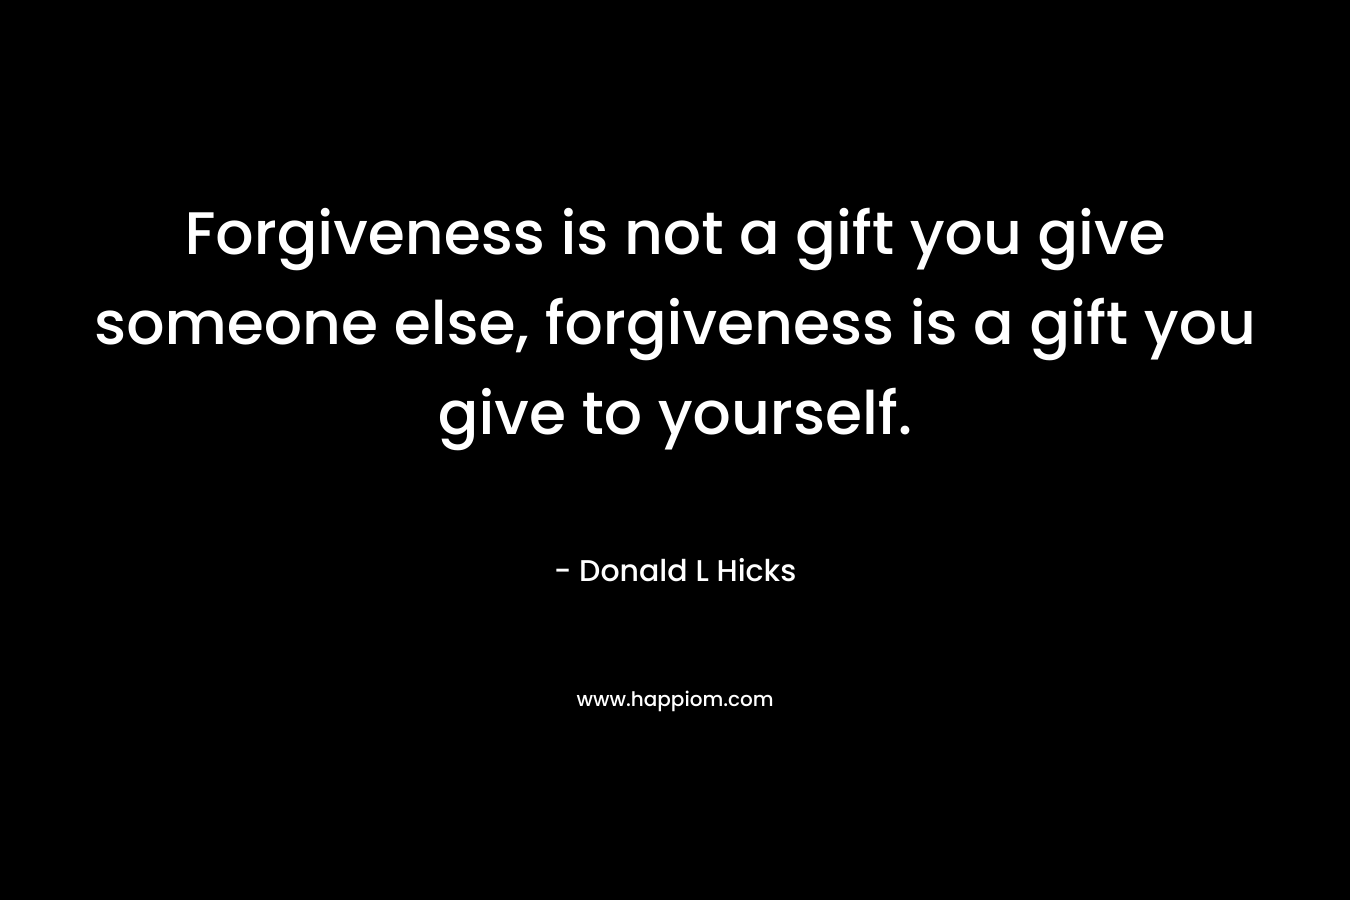 Forgiveness is not a gift you give someone else, forgiveness is a gift you give to yourself.